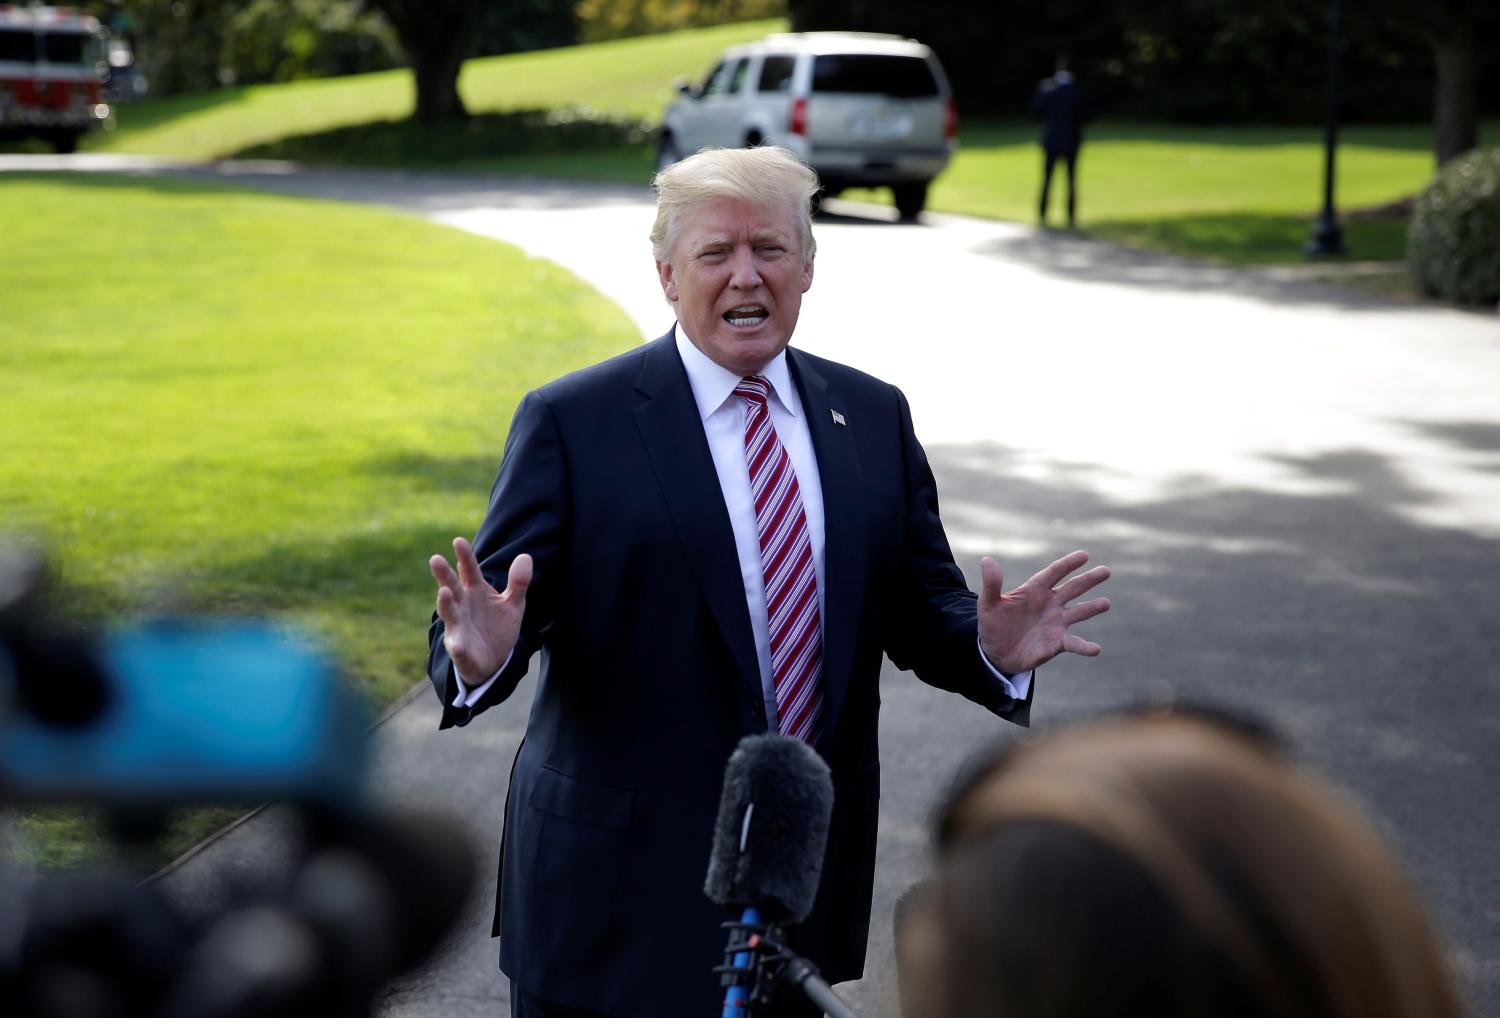 U.S. President Donald Trump speaks to reporters as he departs for Bedminster, New Jersey, from the White House in Washington, U.S., September 29, 2017. REUTERS/Joshua Roberts - RC1419163150